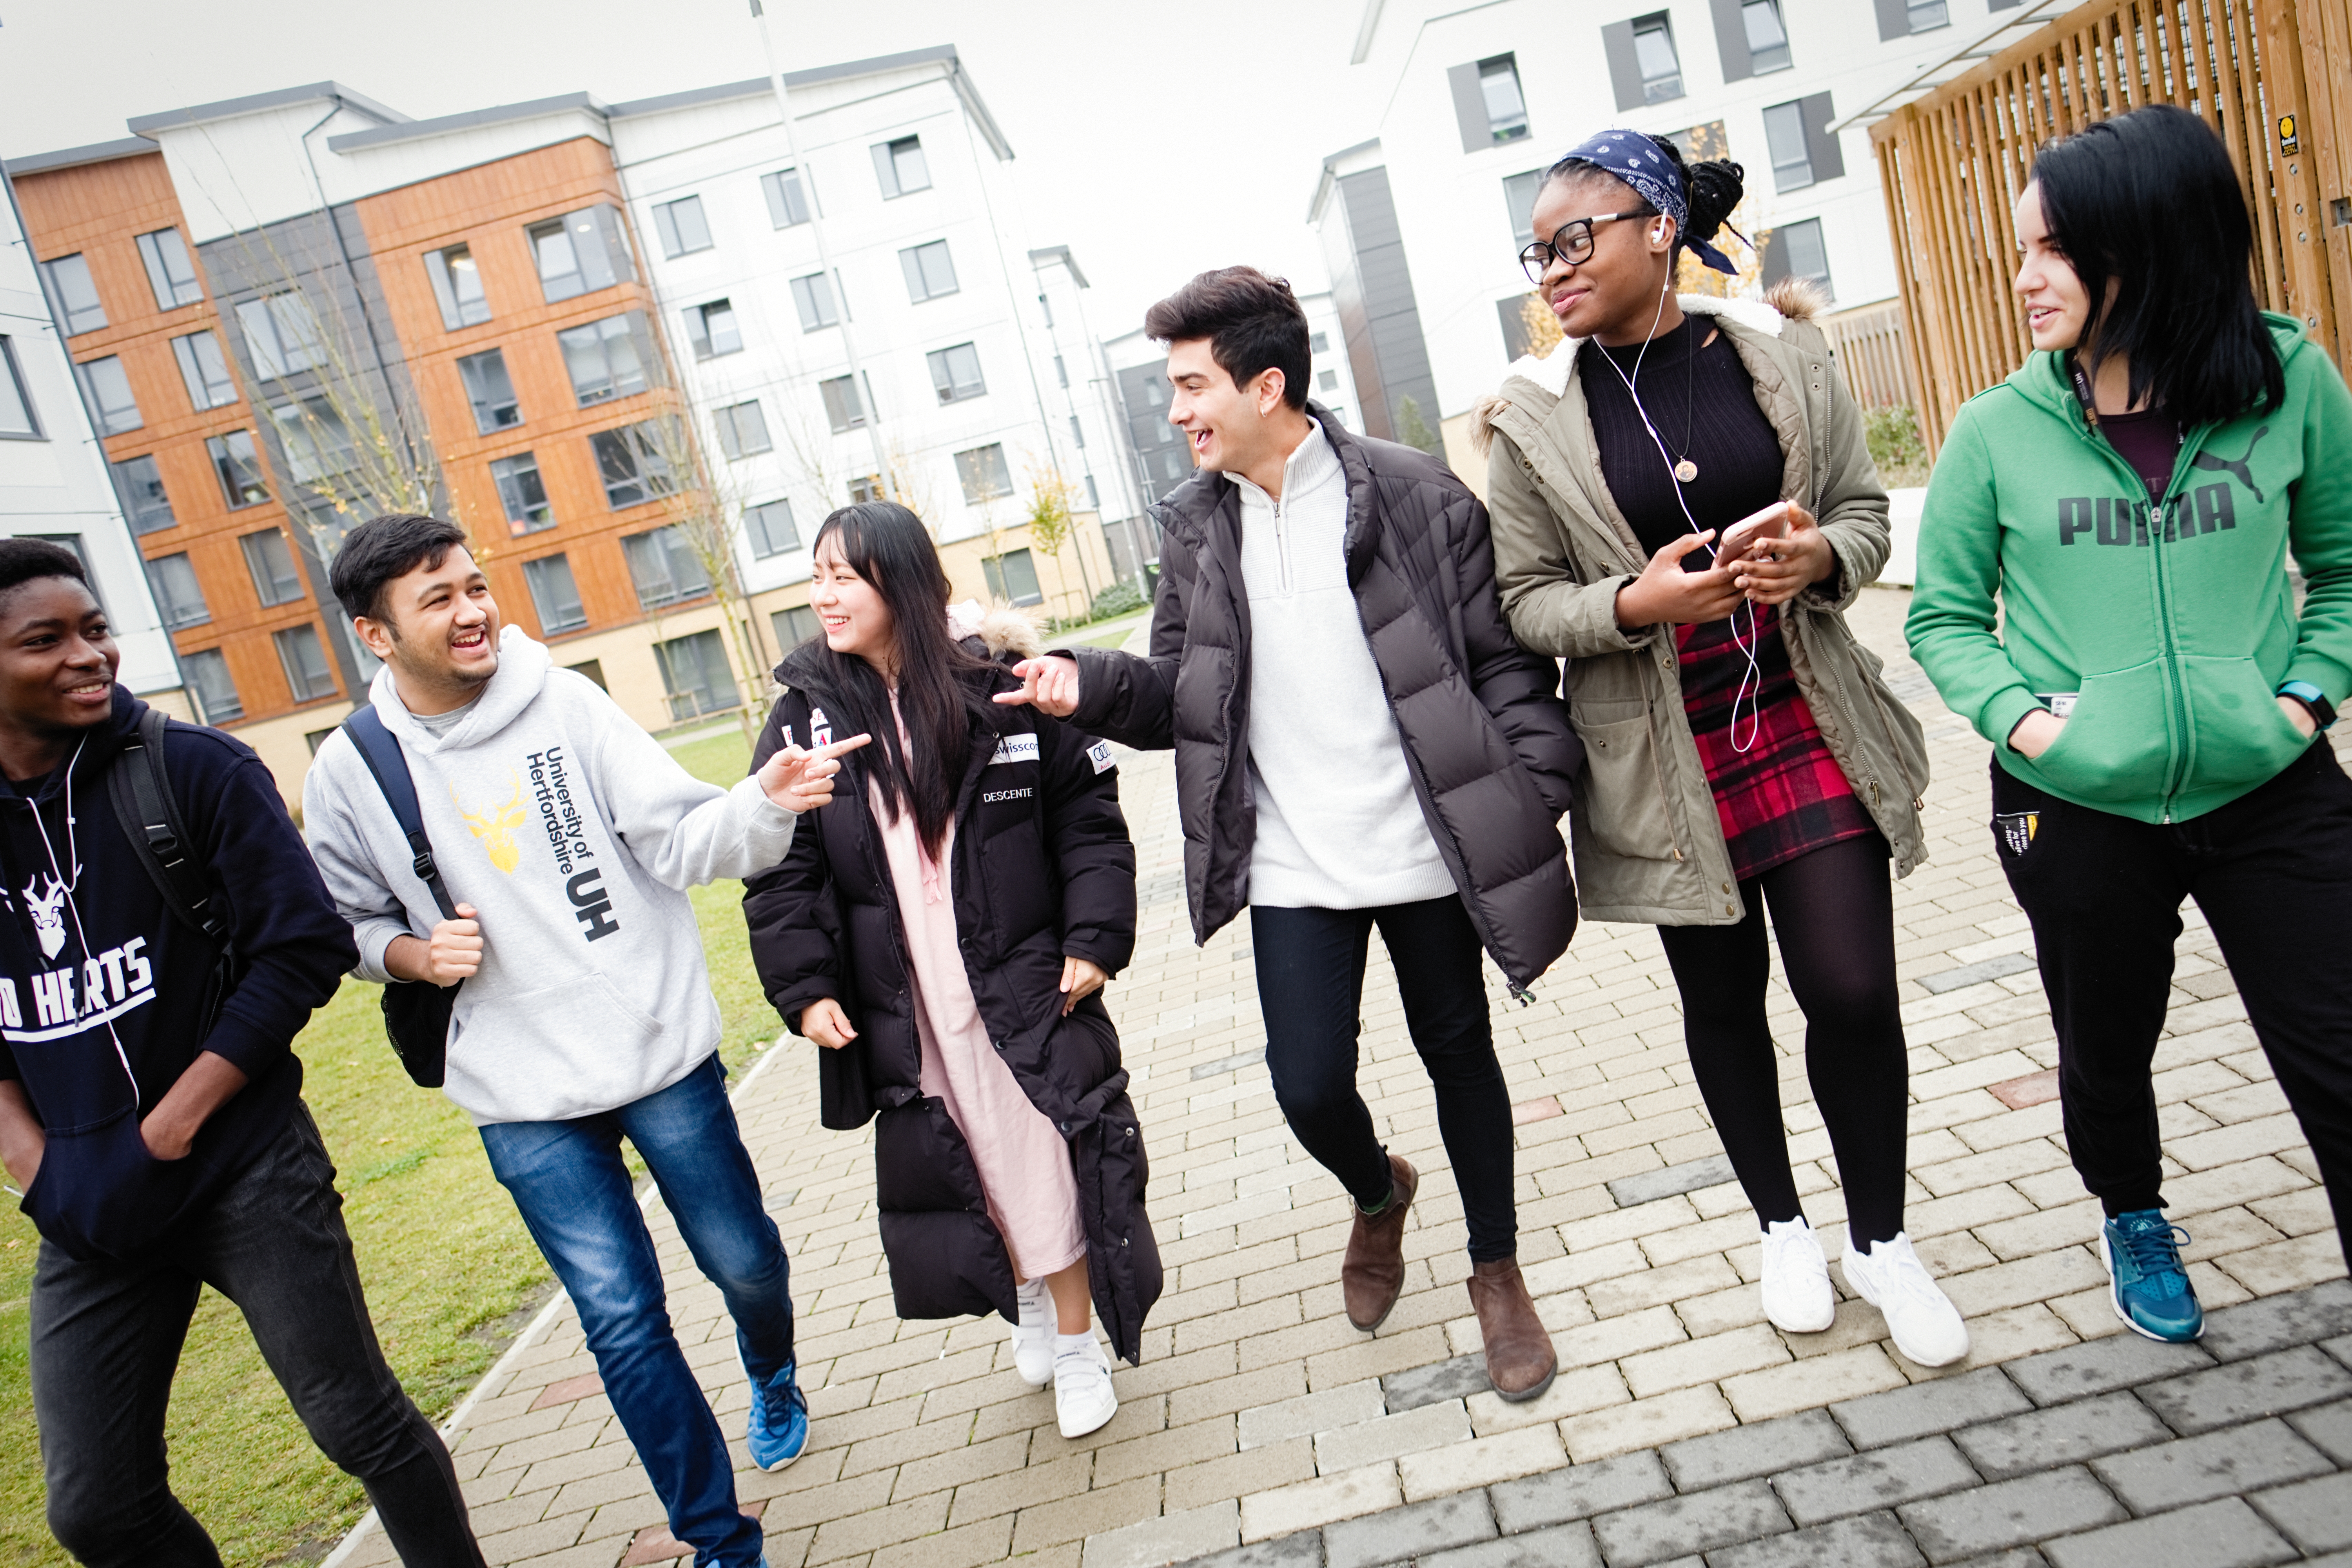 Group of students walking down a path laughing and talking